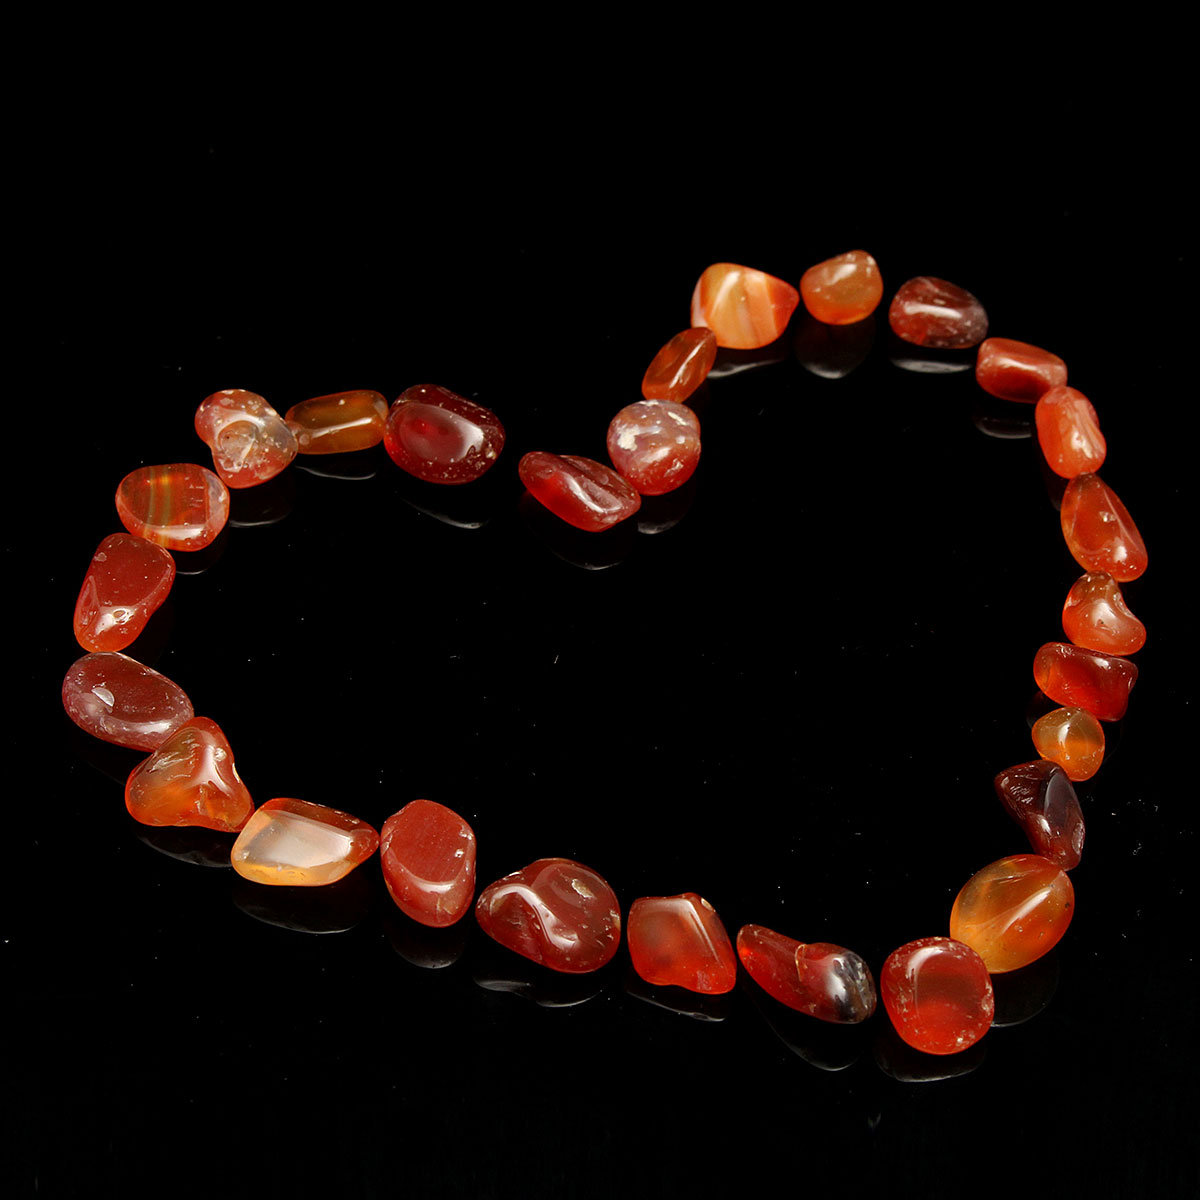 100g Diy Carnelian Natural Tumbled Carnelian Carved Crystal Stones